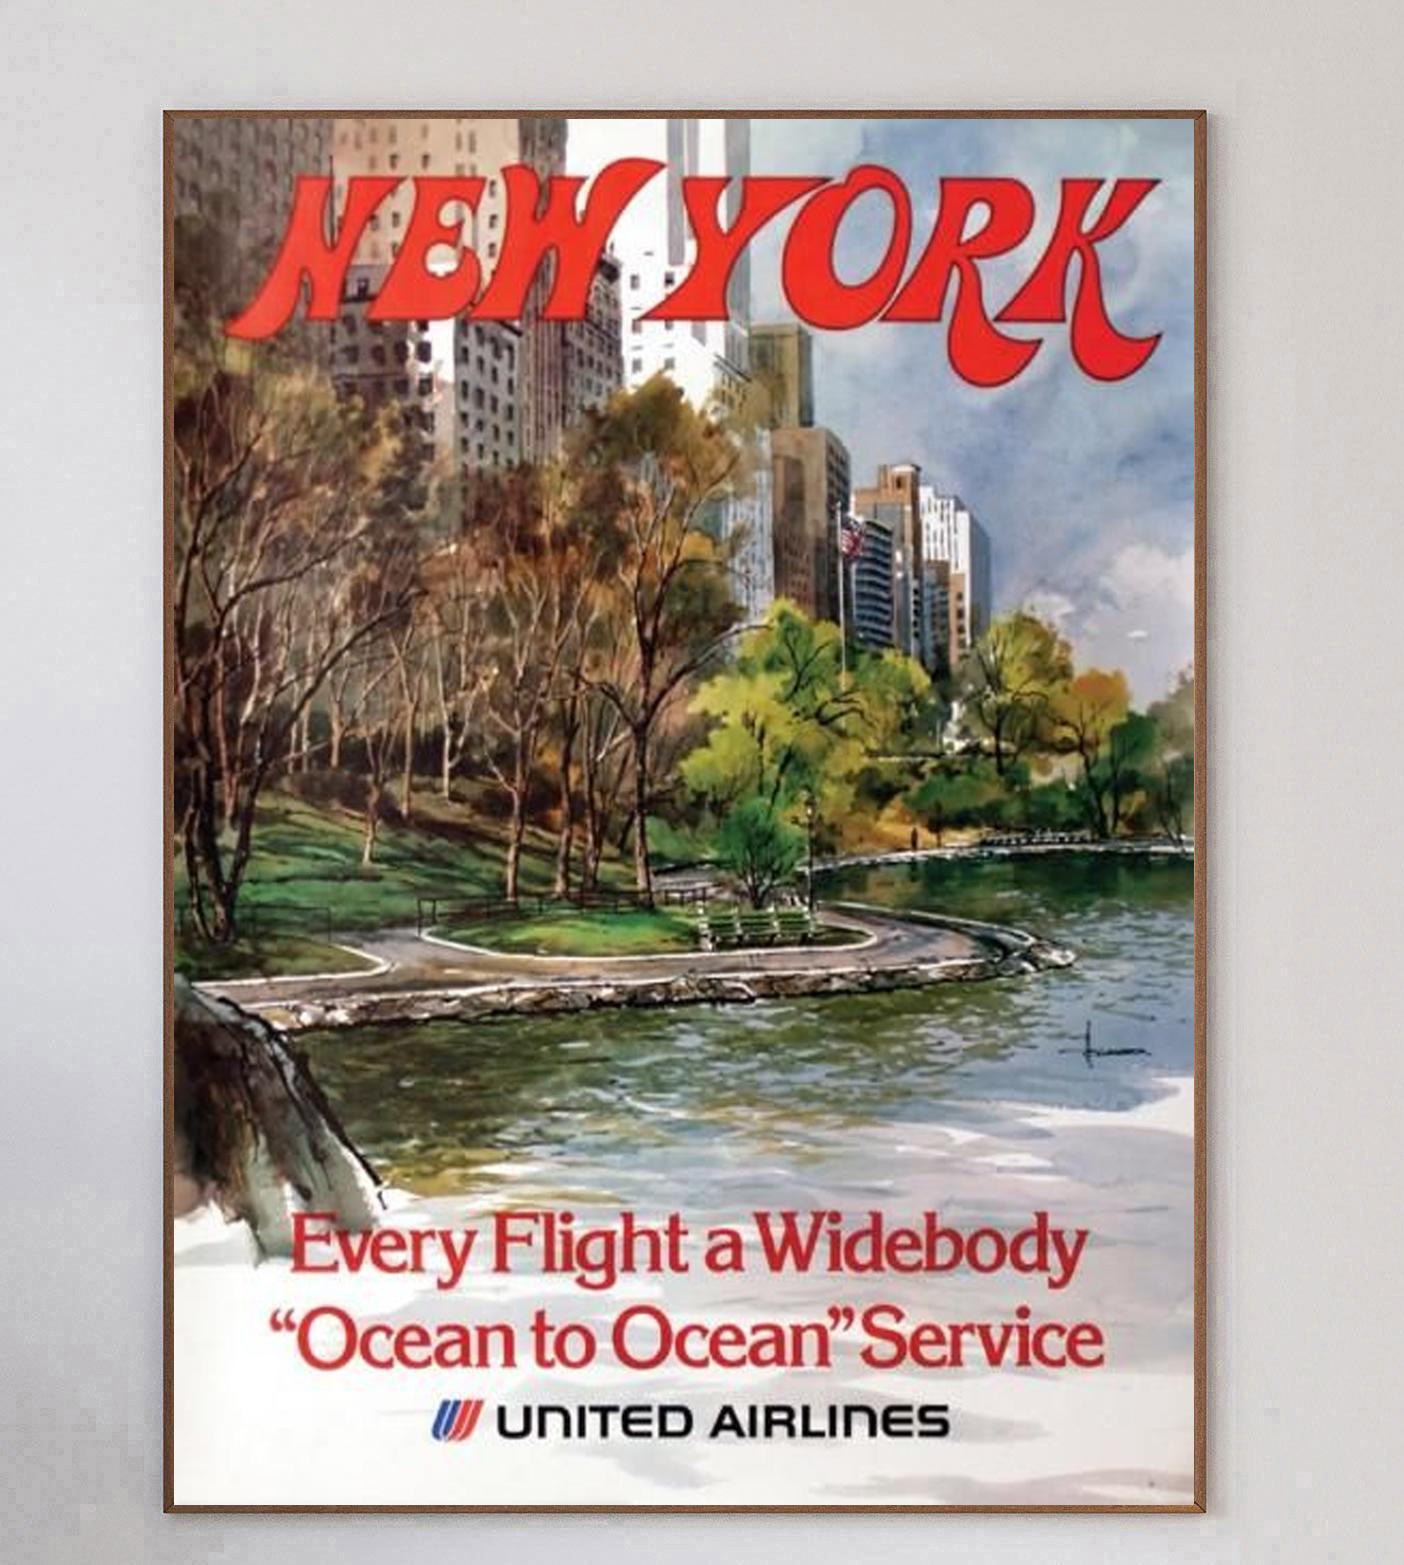 With artwork from artist Hollenbeck, this beautiful & rare poster promotes United Airlines routes to New York. Depicting a sunny scene in Central Park in Manhattan, the poster reads 